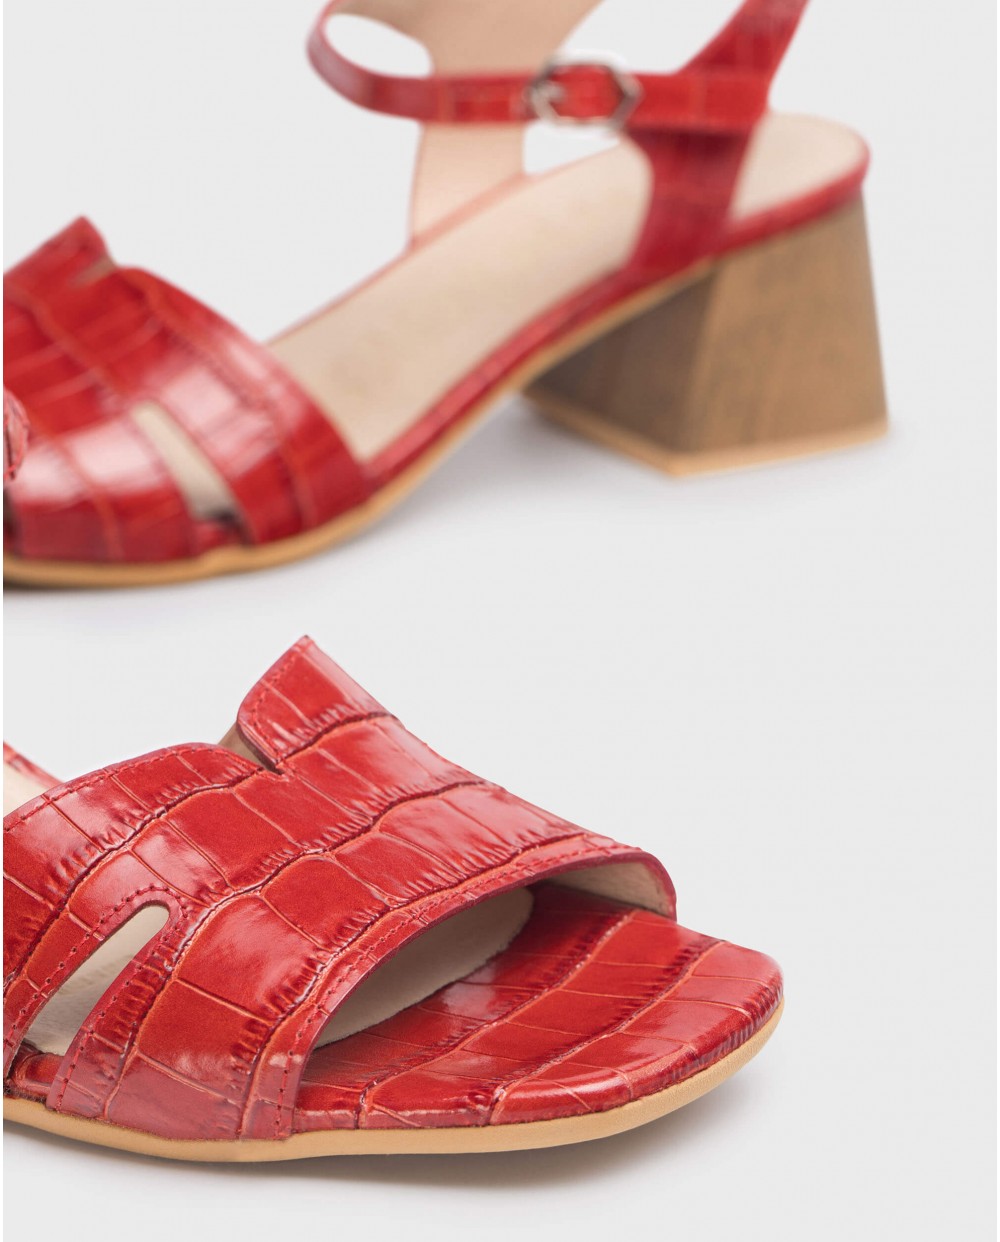 Wonders-Outlet-Wood effect leather sandal